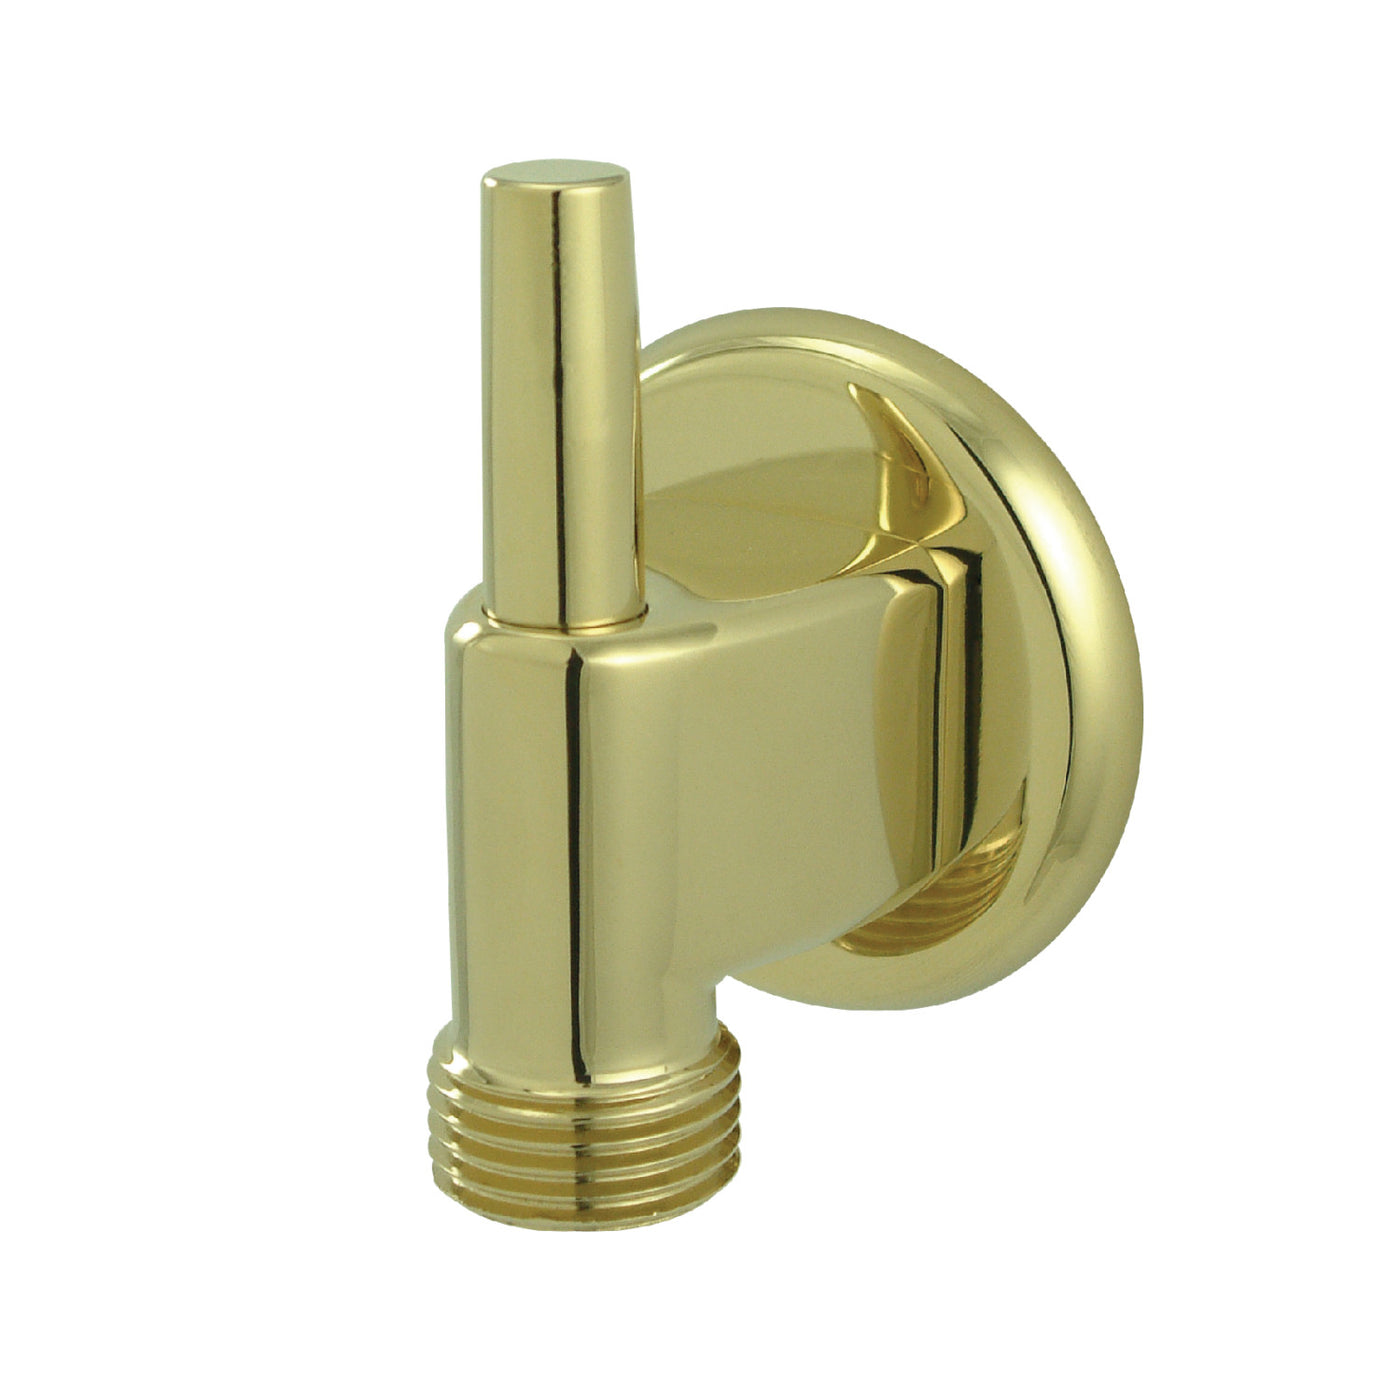 Elements of Design DK174A2 Wall Mount Supply Elbow with Pin Wall Hook, Polished Brass